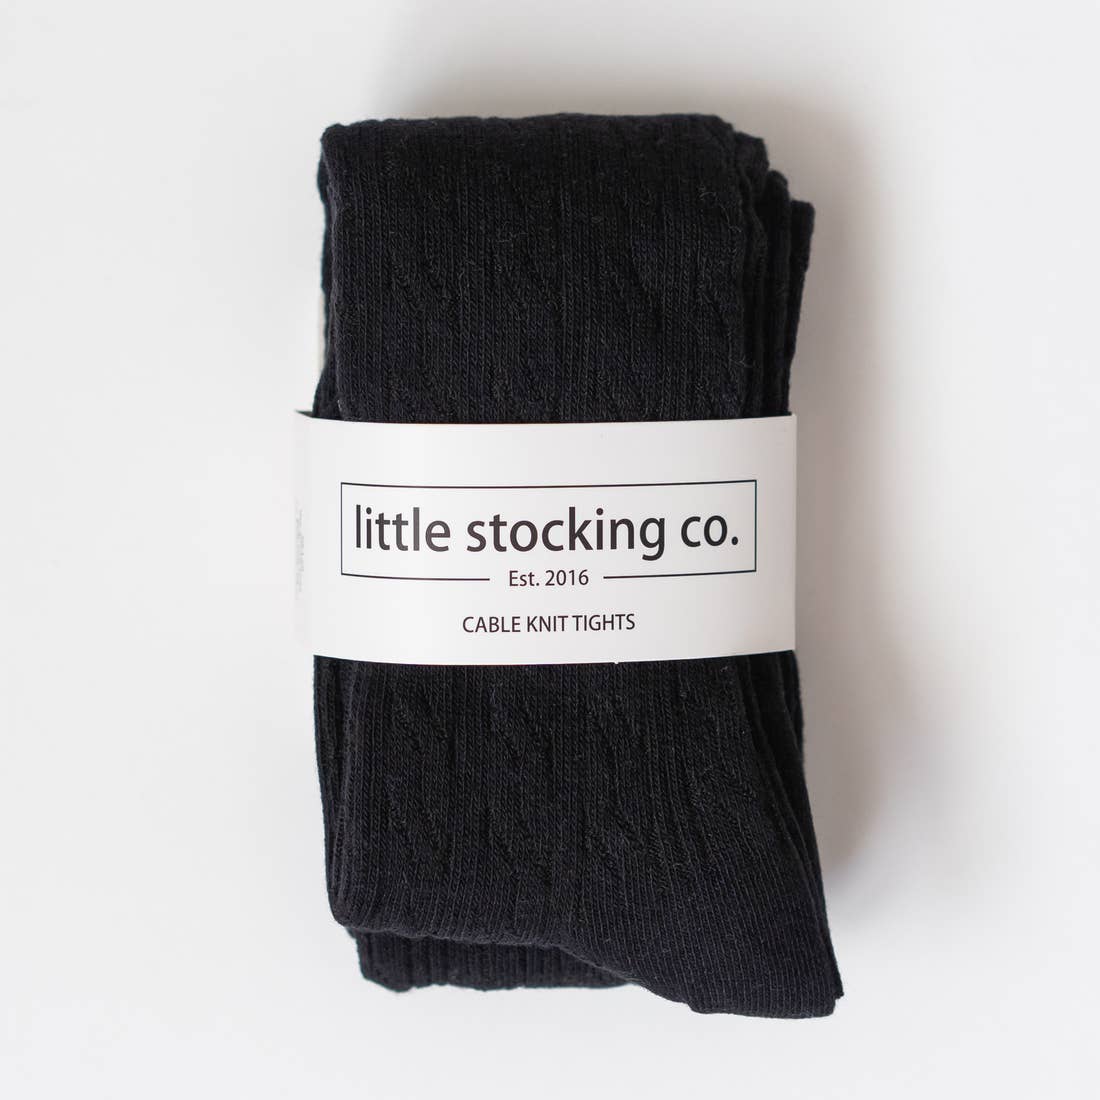 Little Stocking Co. – Channing Baby & Co.